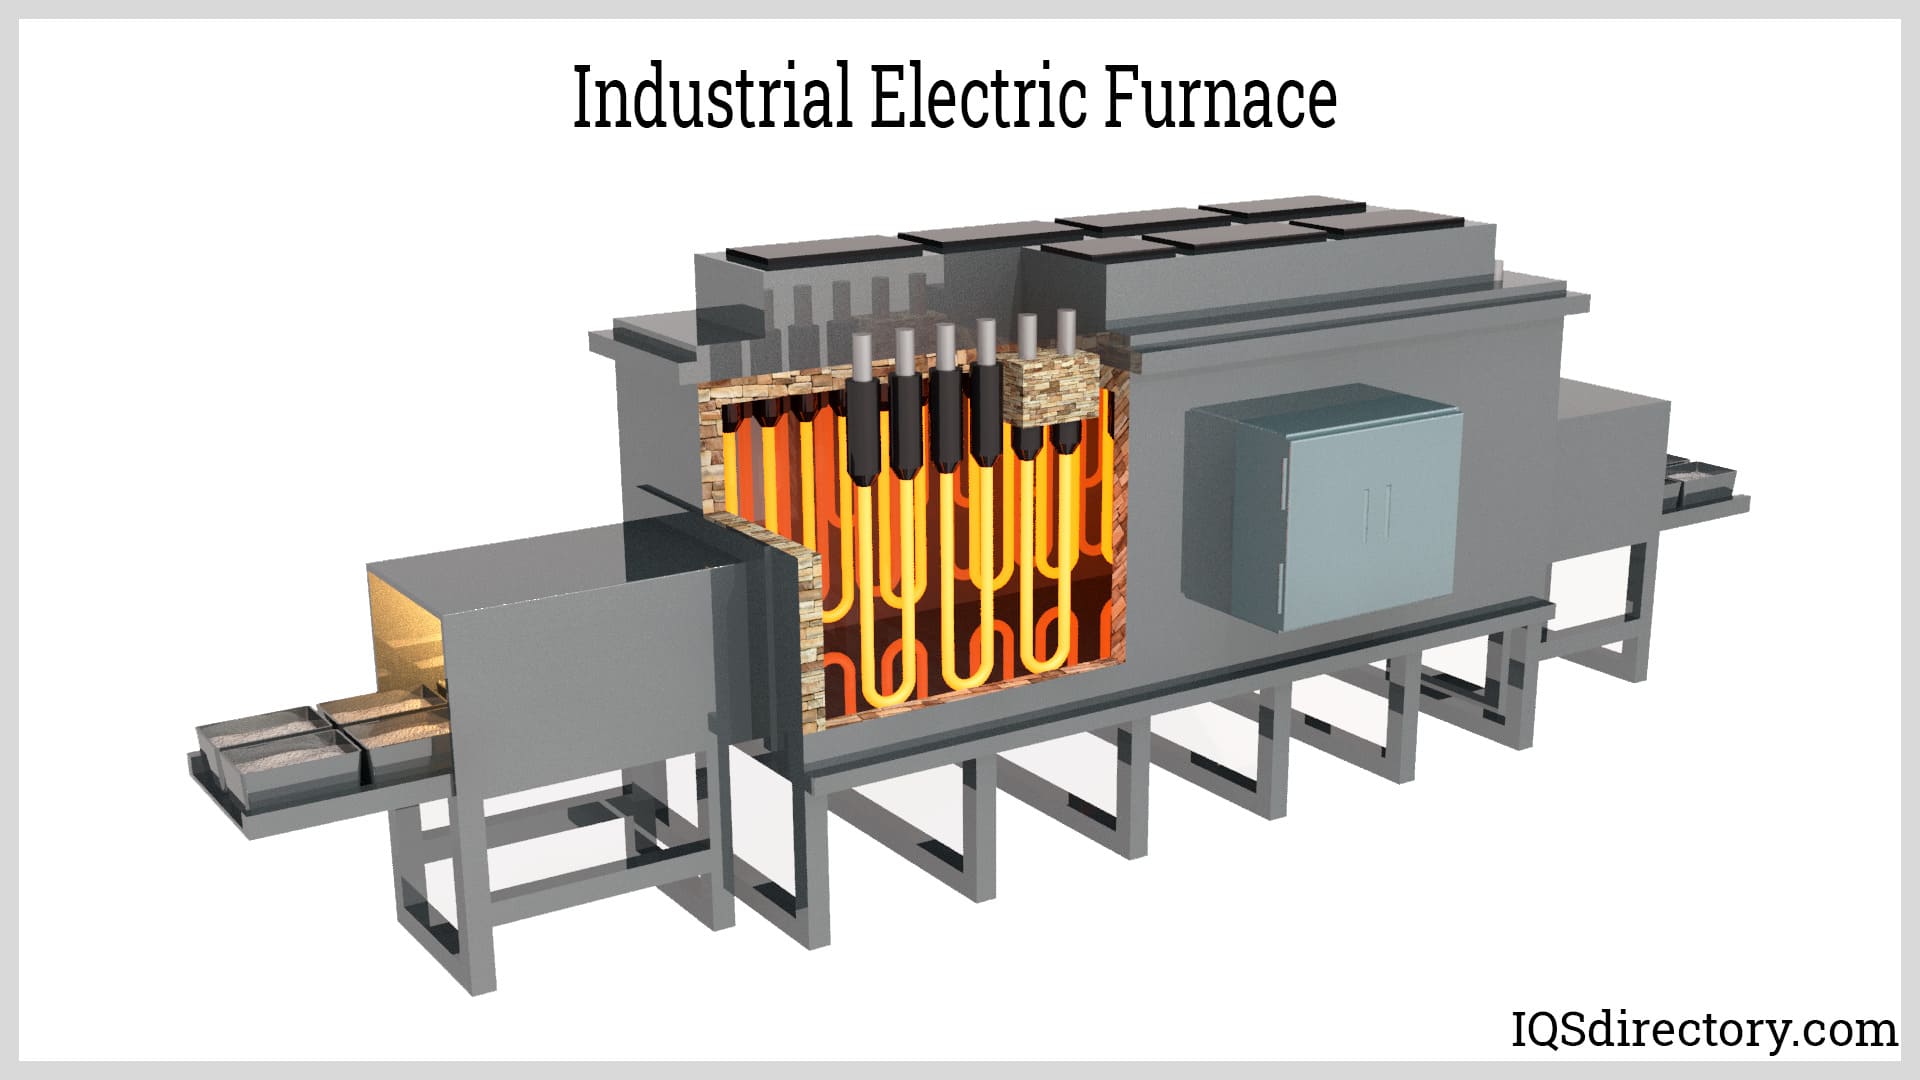 furnaces-what-is-it-how-does-it-work-types-uses-fueling